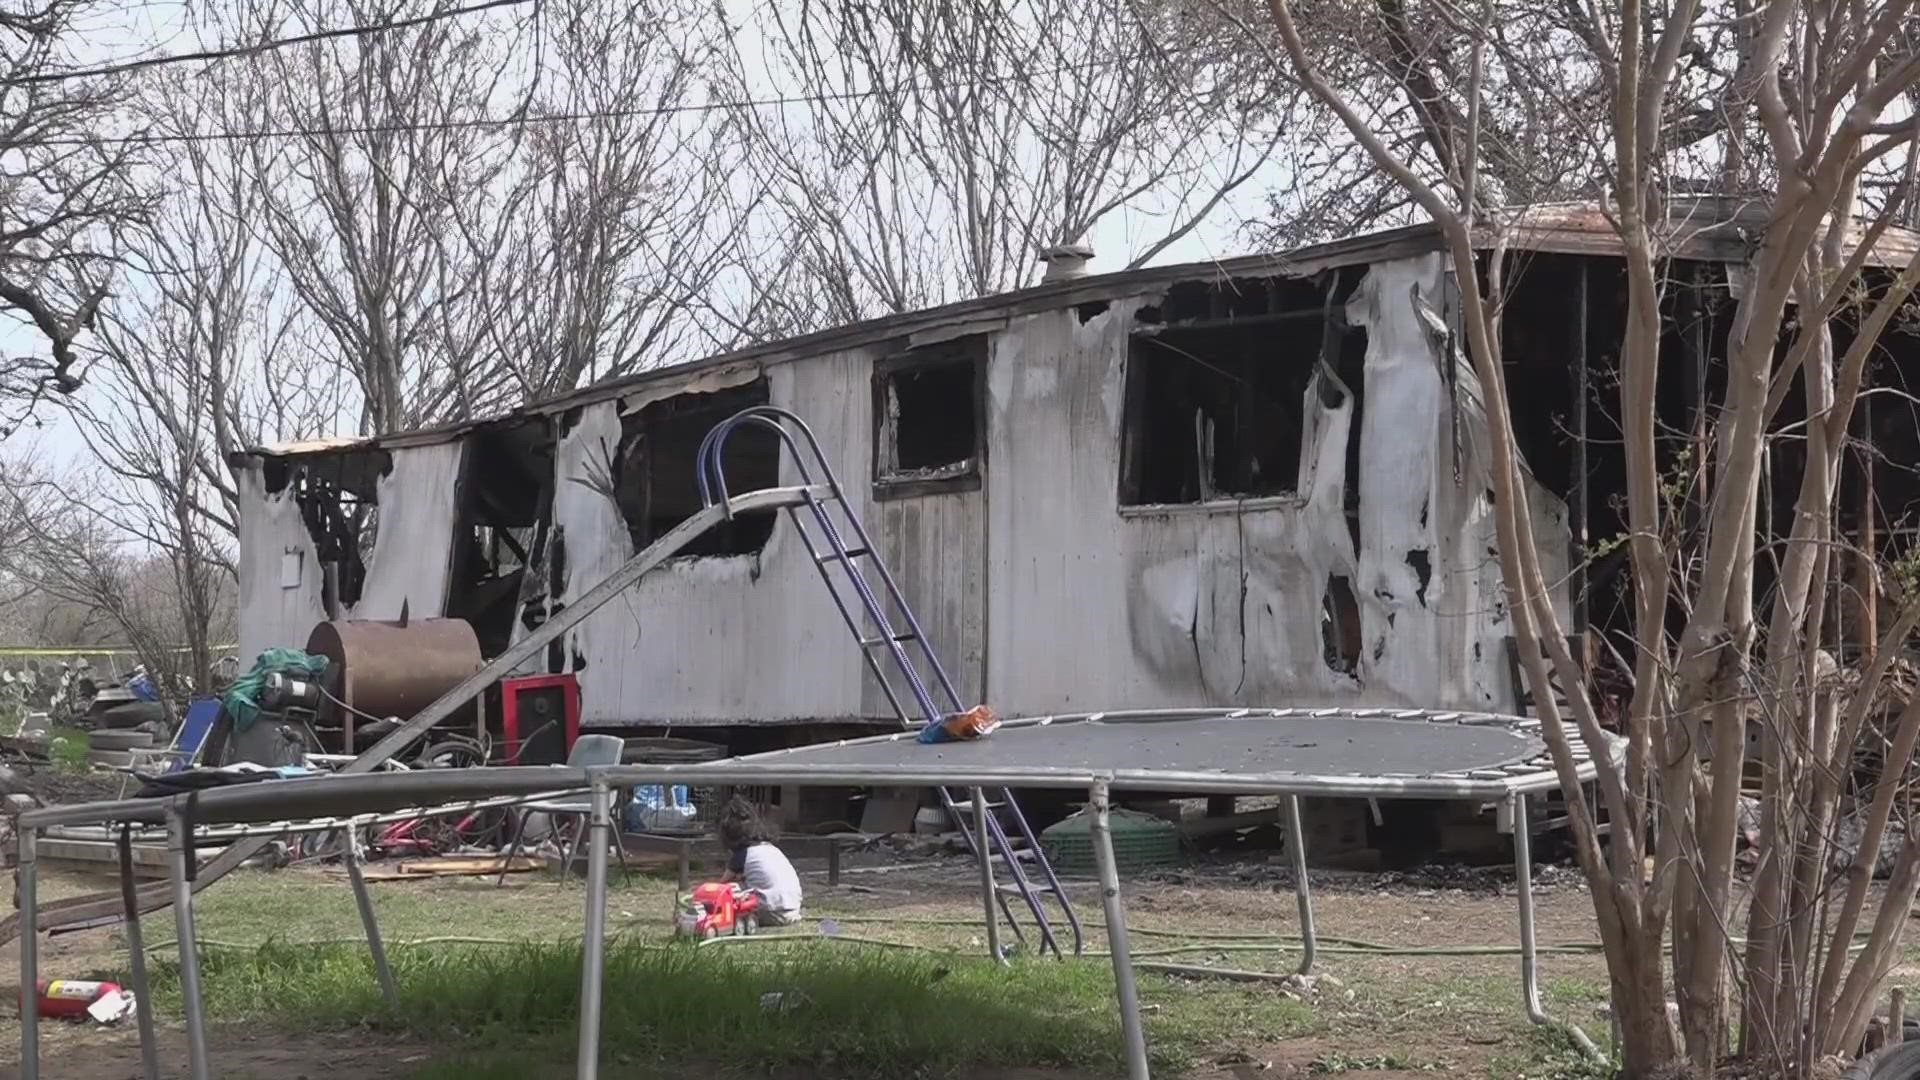 A family in southwest Bexar County is left without their 4-year-old daughter after a house fire on Sunday morning.